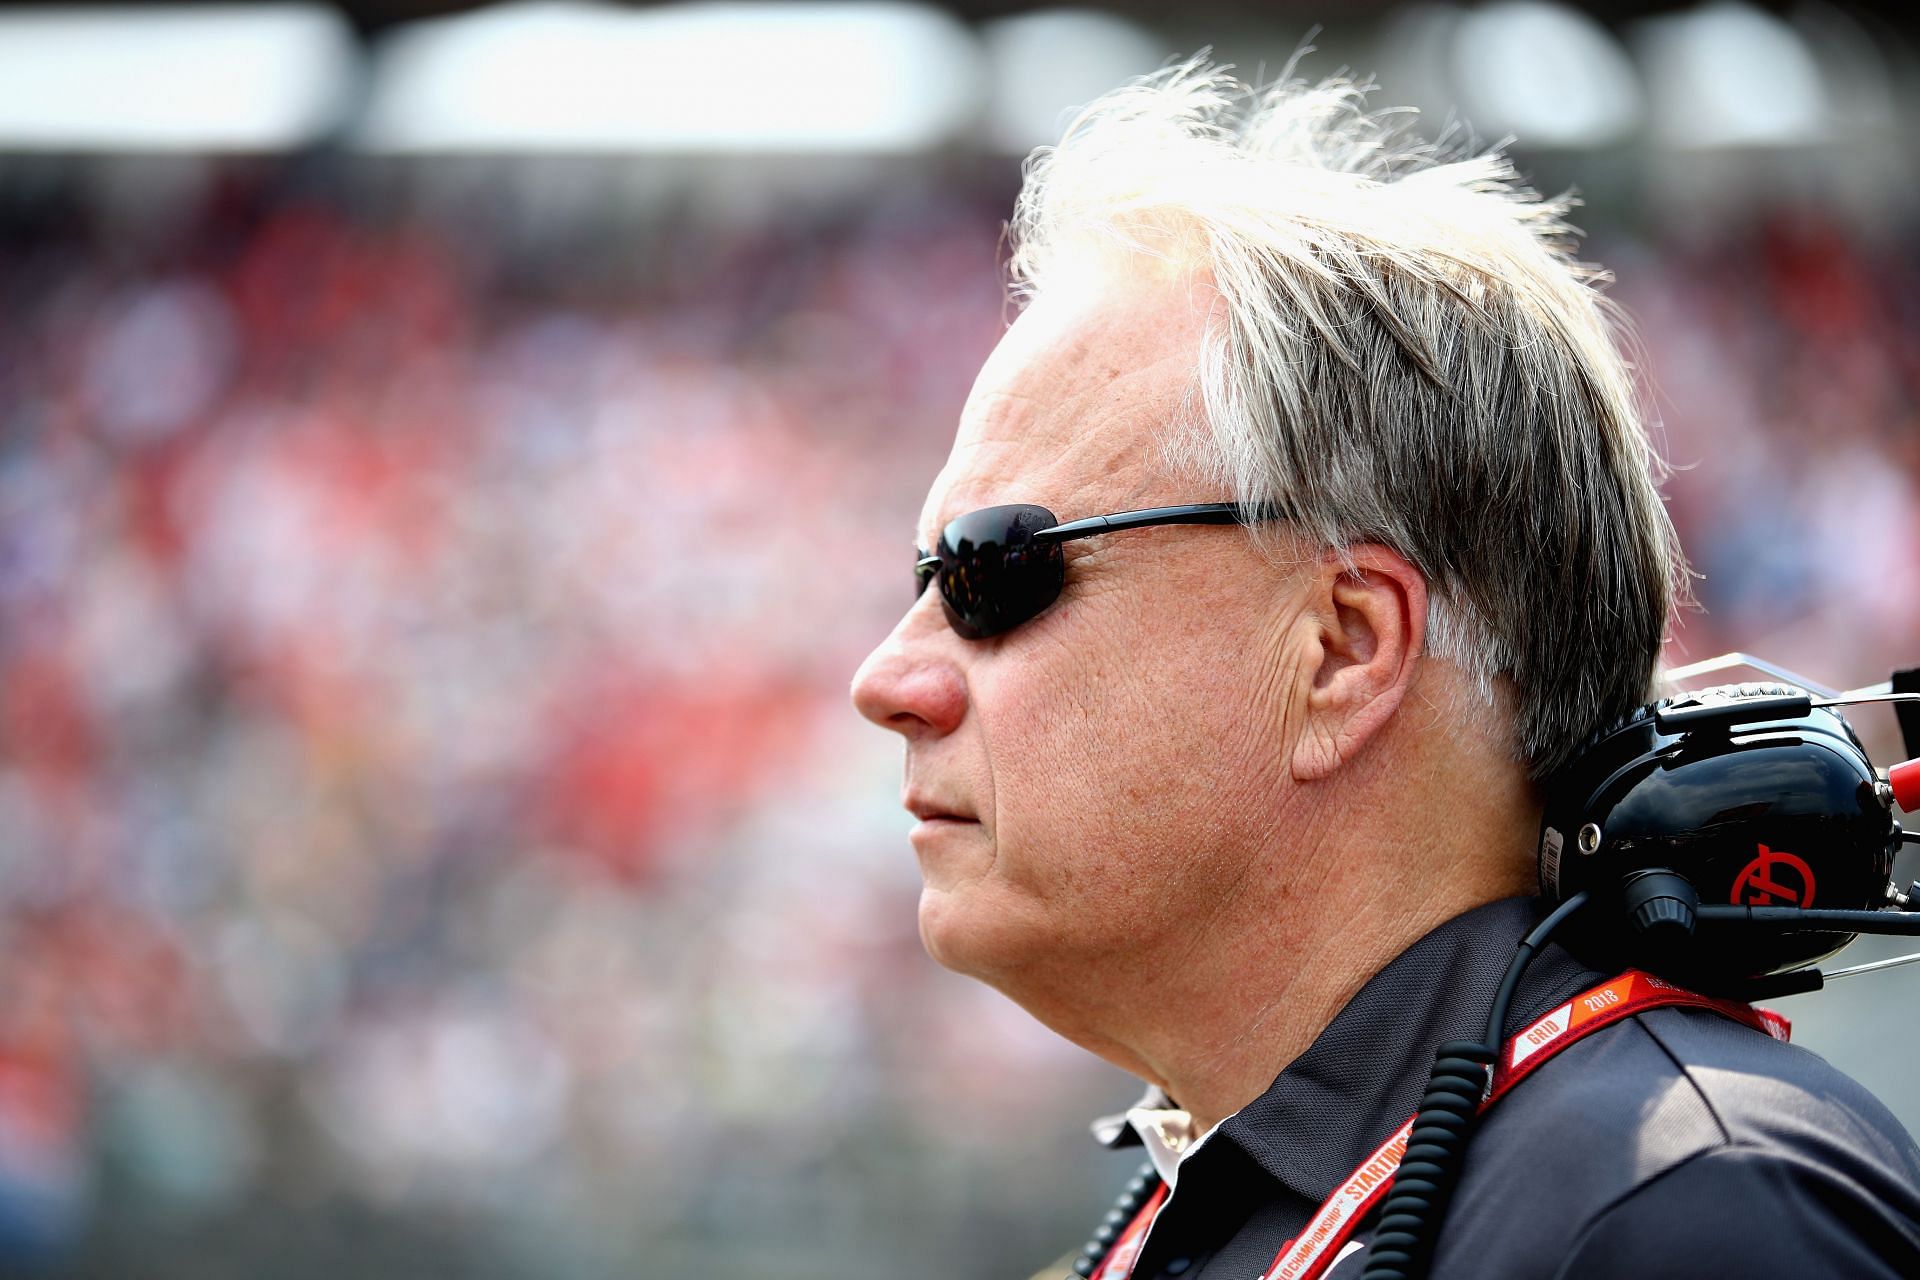 Haas F1 founder and chairman Gene Haas on the grid before the F1 Grand Prix of Germany in Hockenheim (Photo by Mark Thompson/Getty Images)